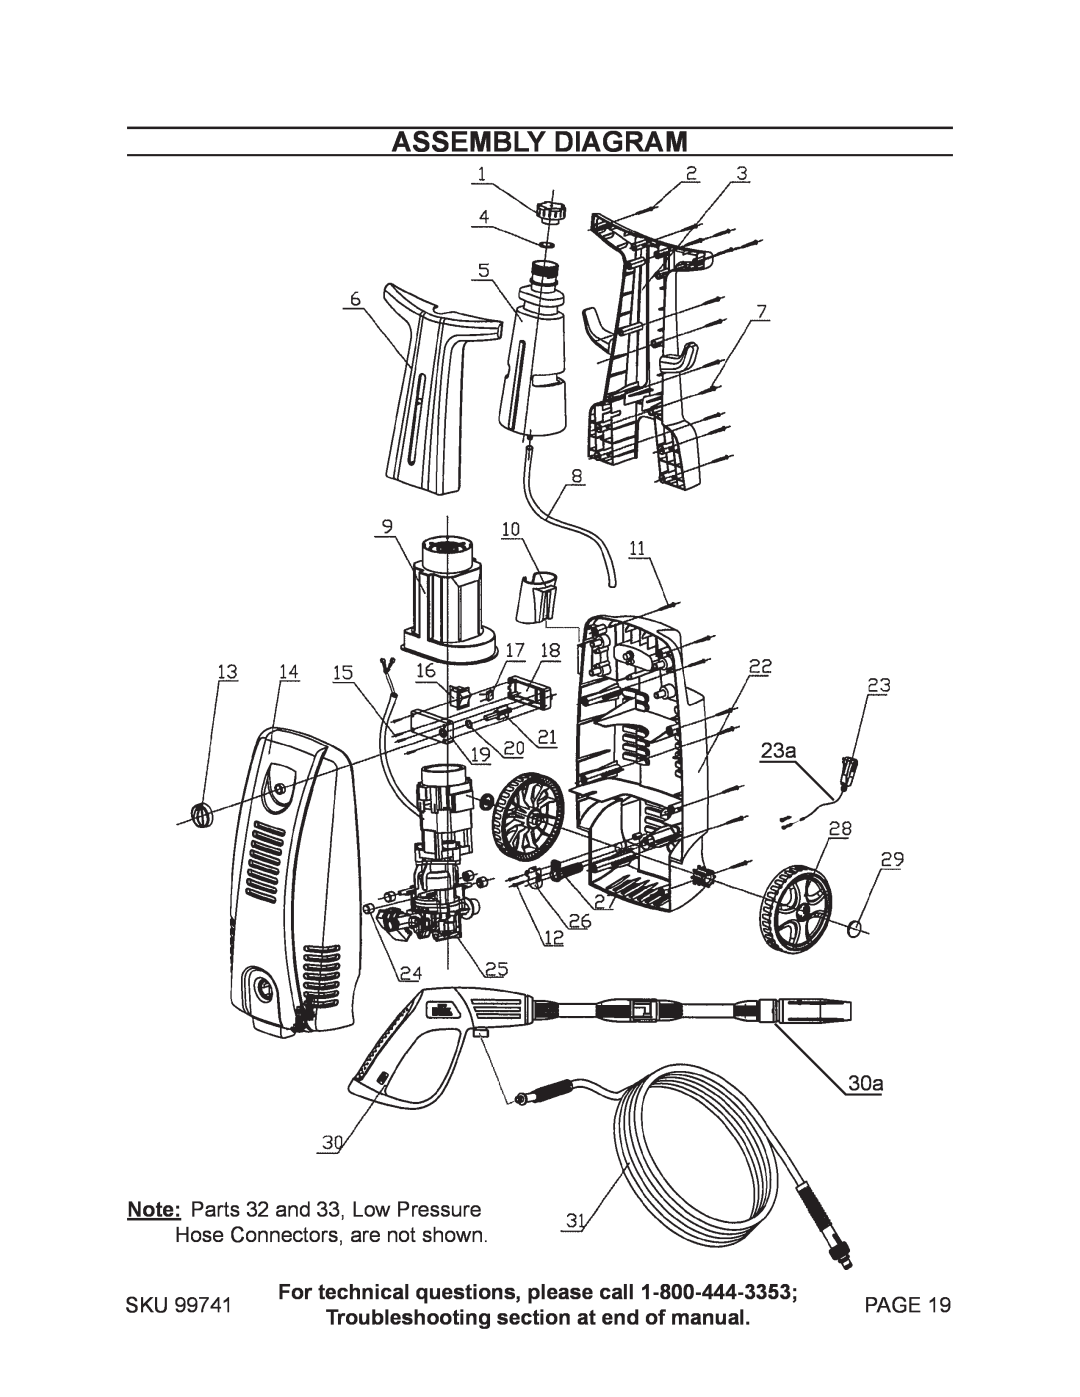 Harbor Freight Tools 99741 manual Assembly Diagram, 23a Note Parts 32 and 33, Low Pressure, Hose Connectors, are not shown 